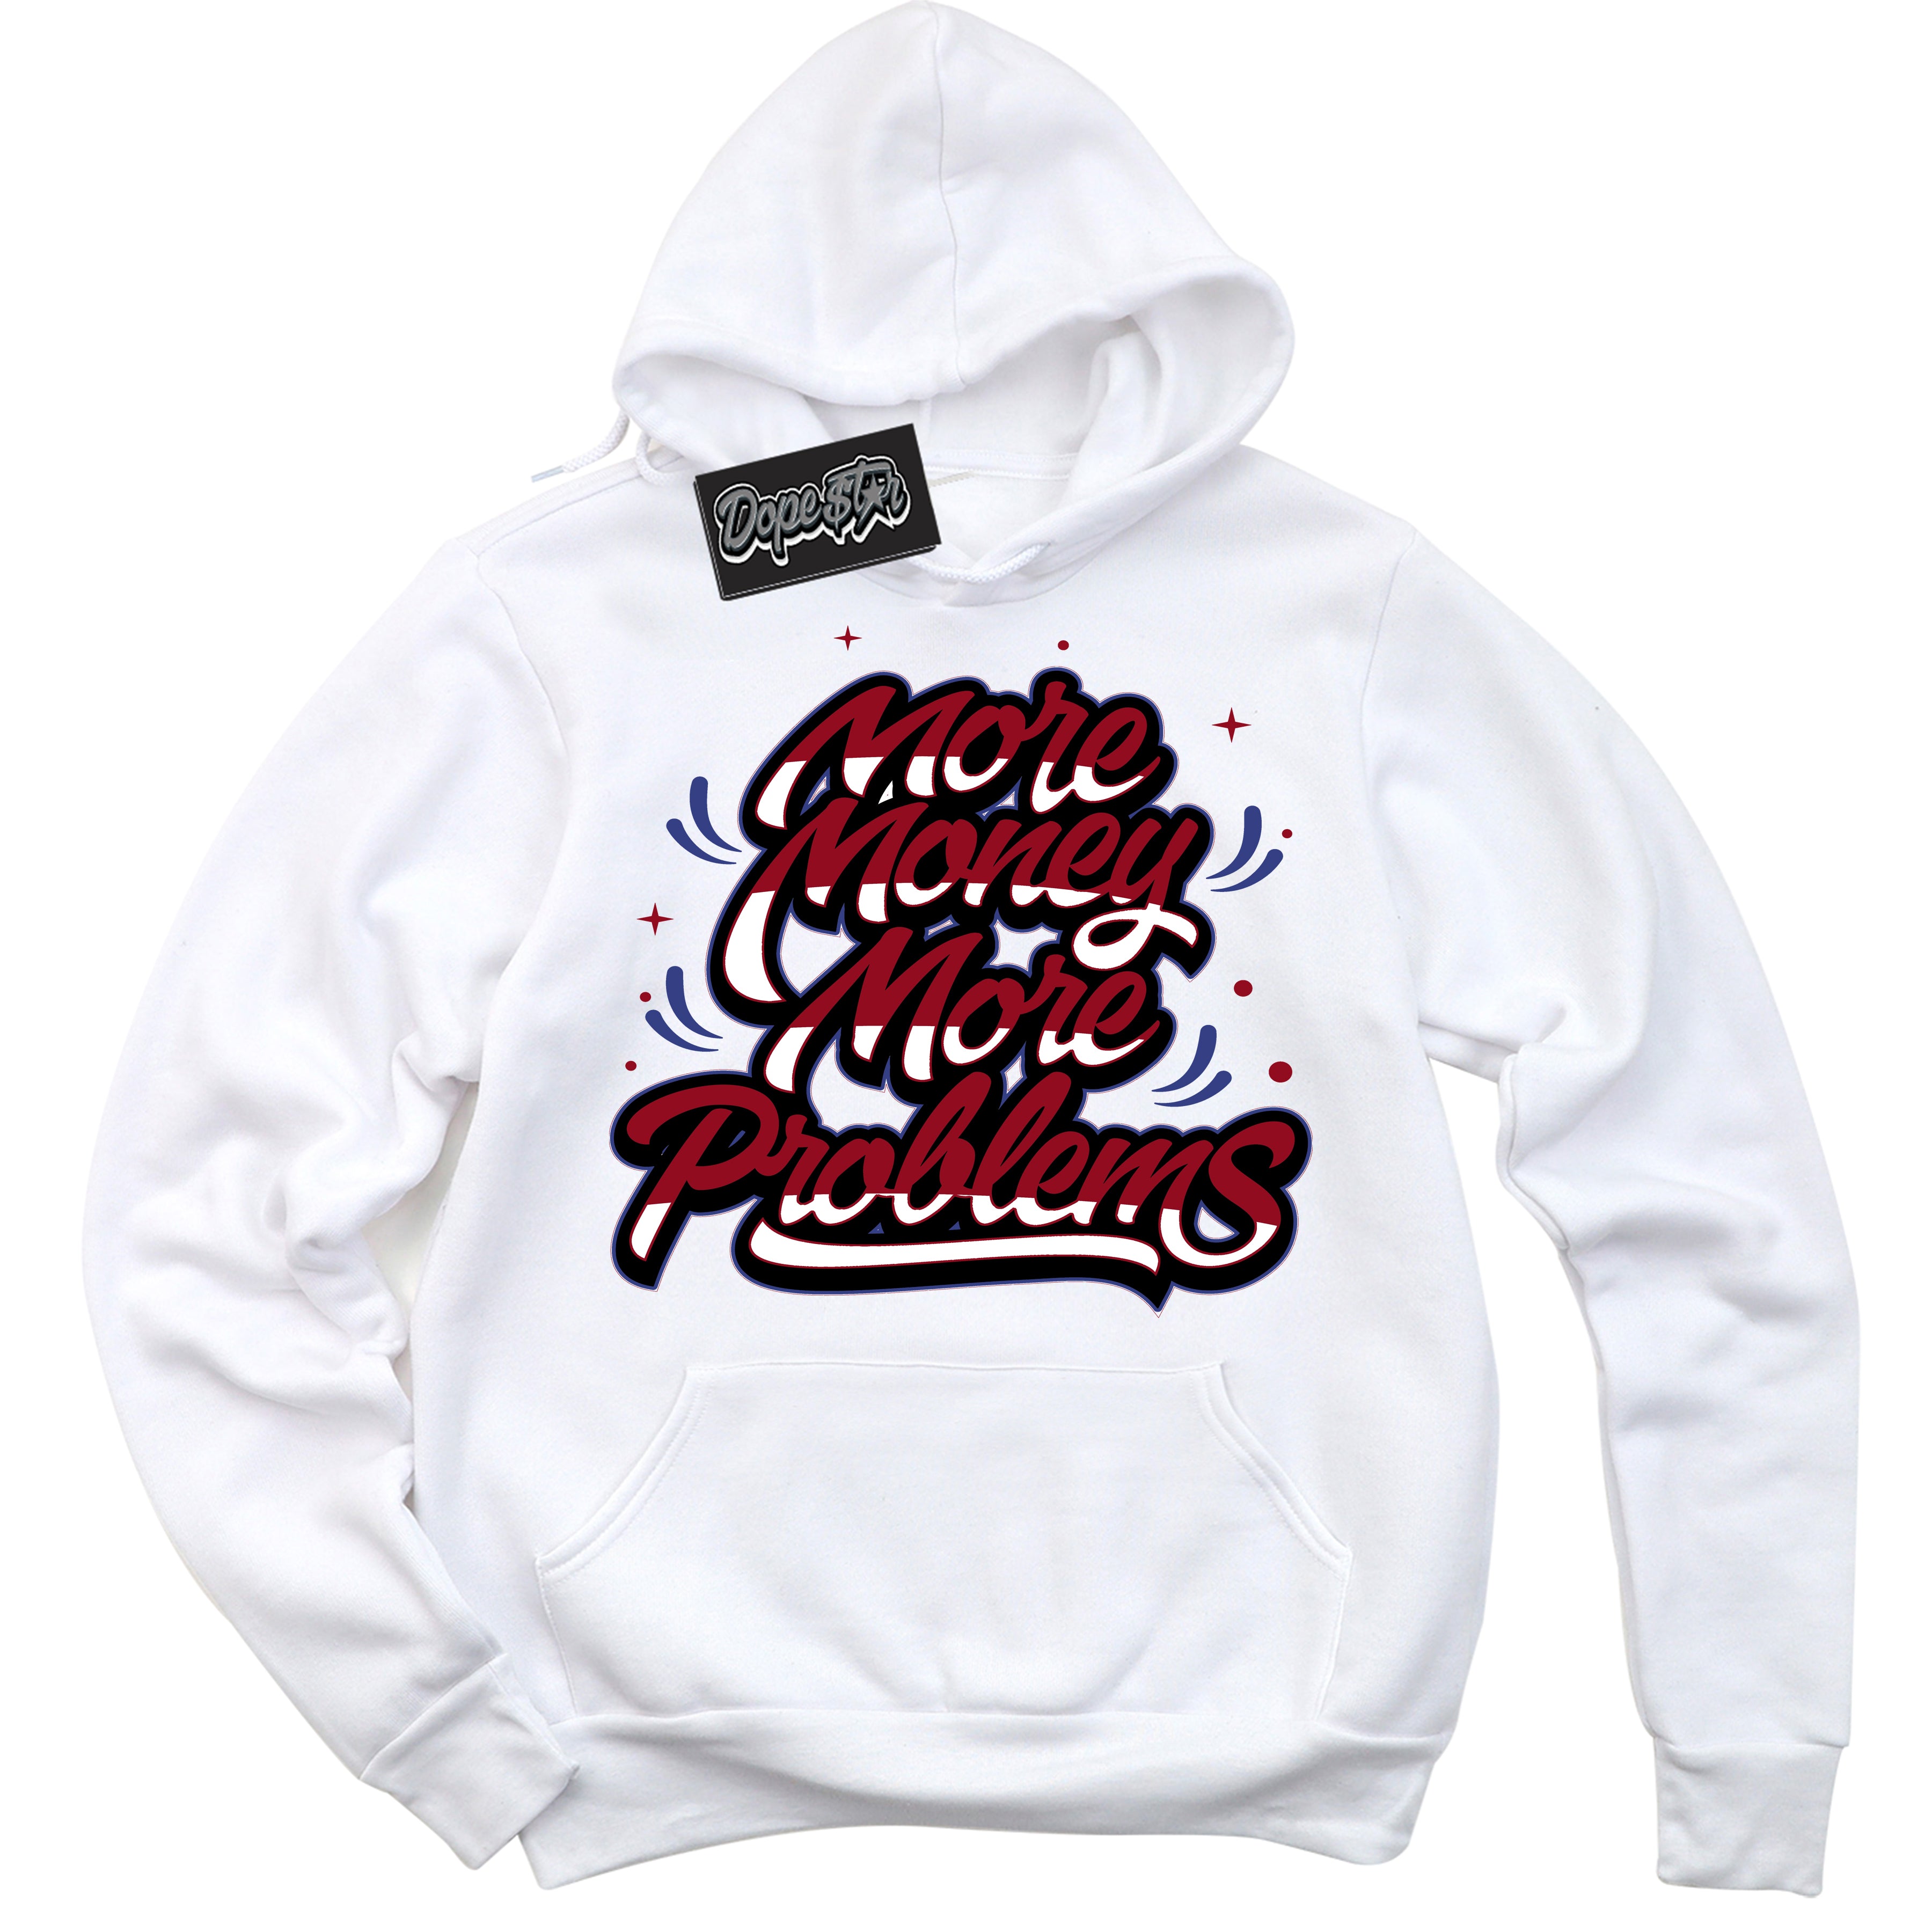 Cool White Hoodie with “ More Money More Problems ”  design that Perfectly Matches Playoffs 8s Sneakers.